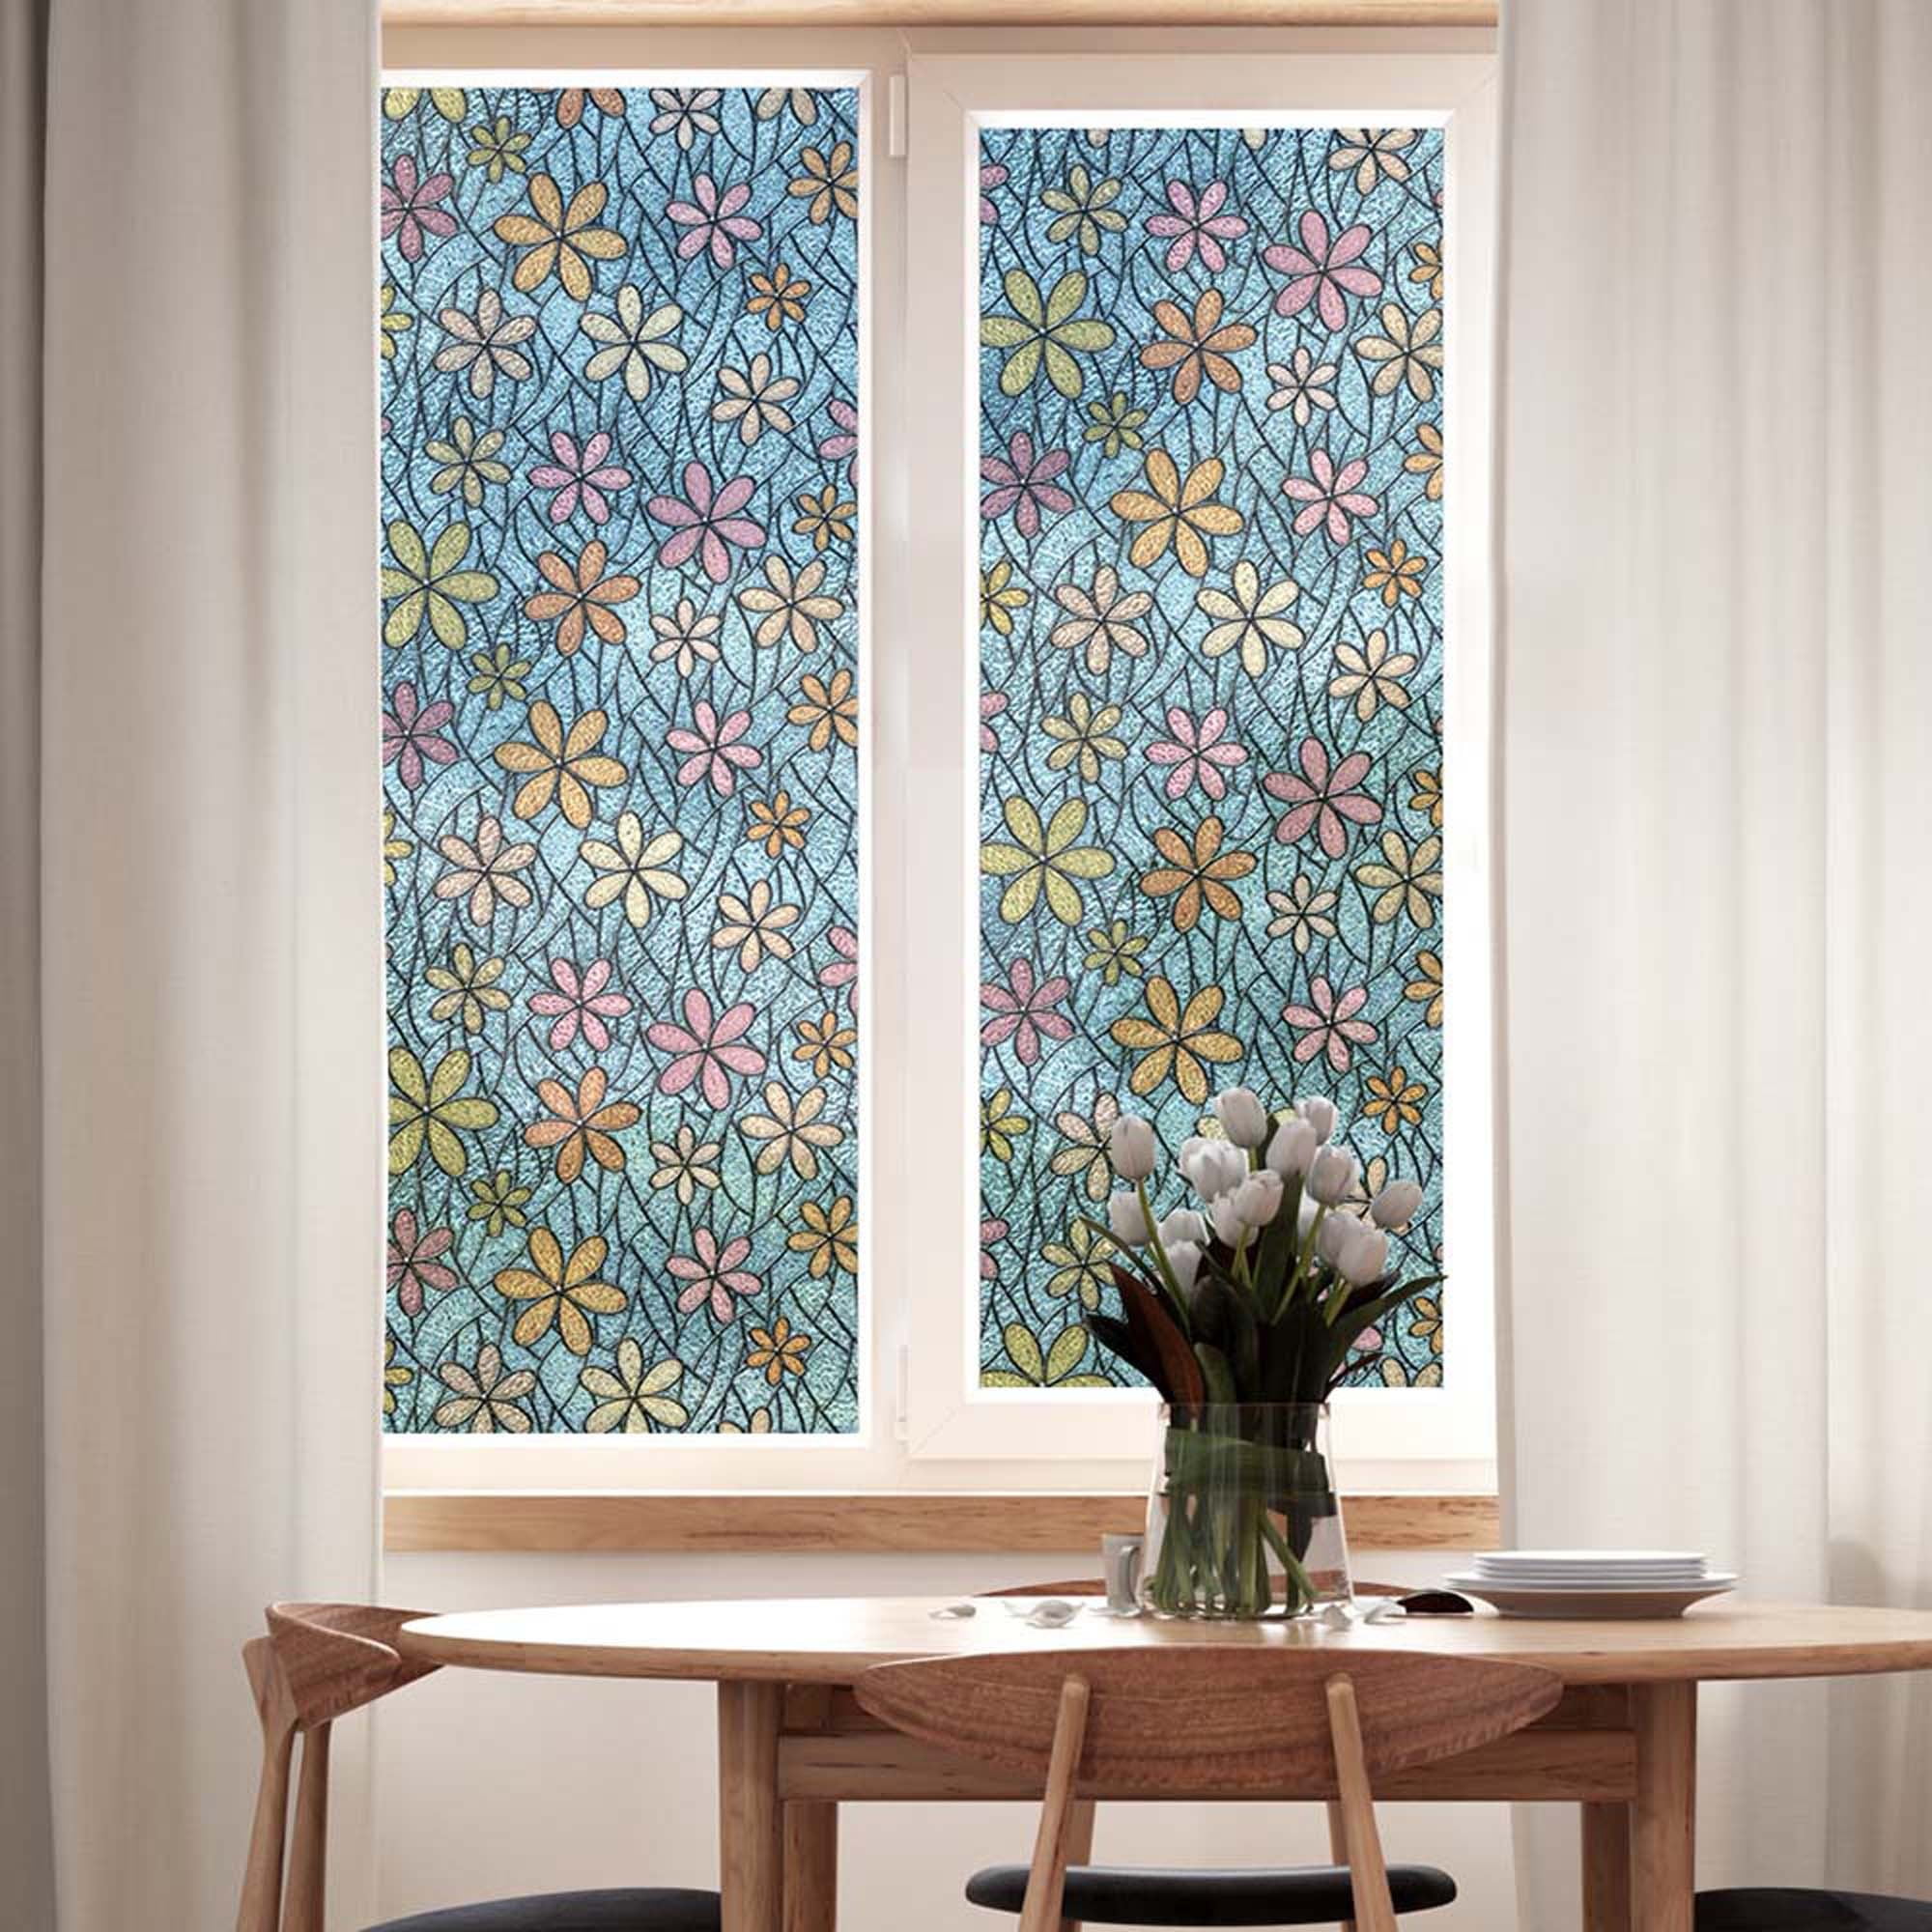 Floral Static Cling Window Film PVC Sticker Private Bedroom Living-room Decor 